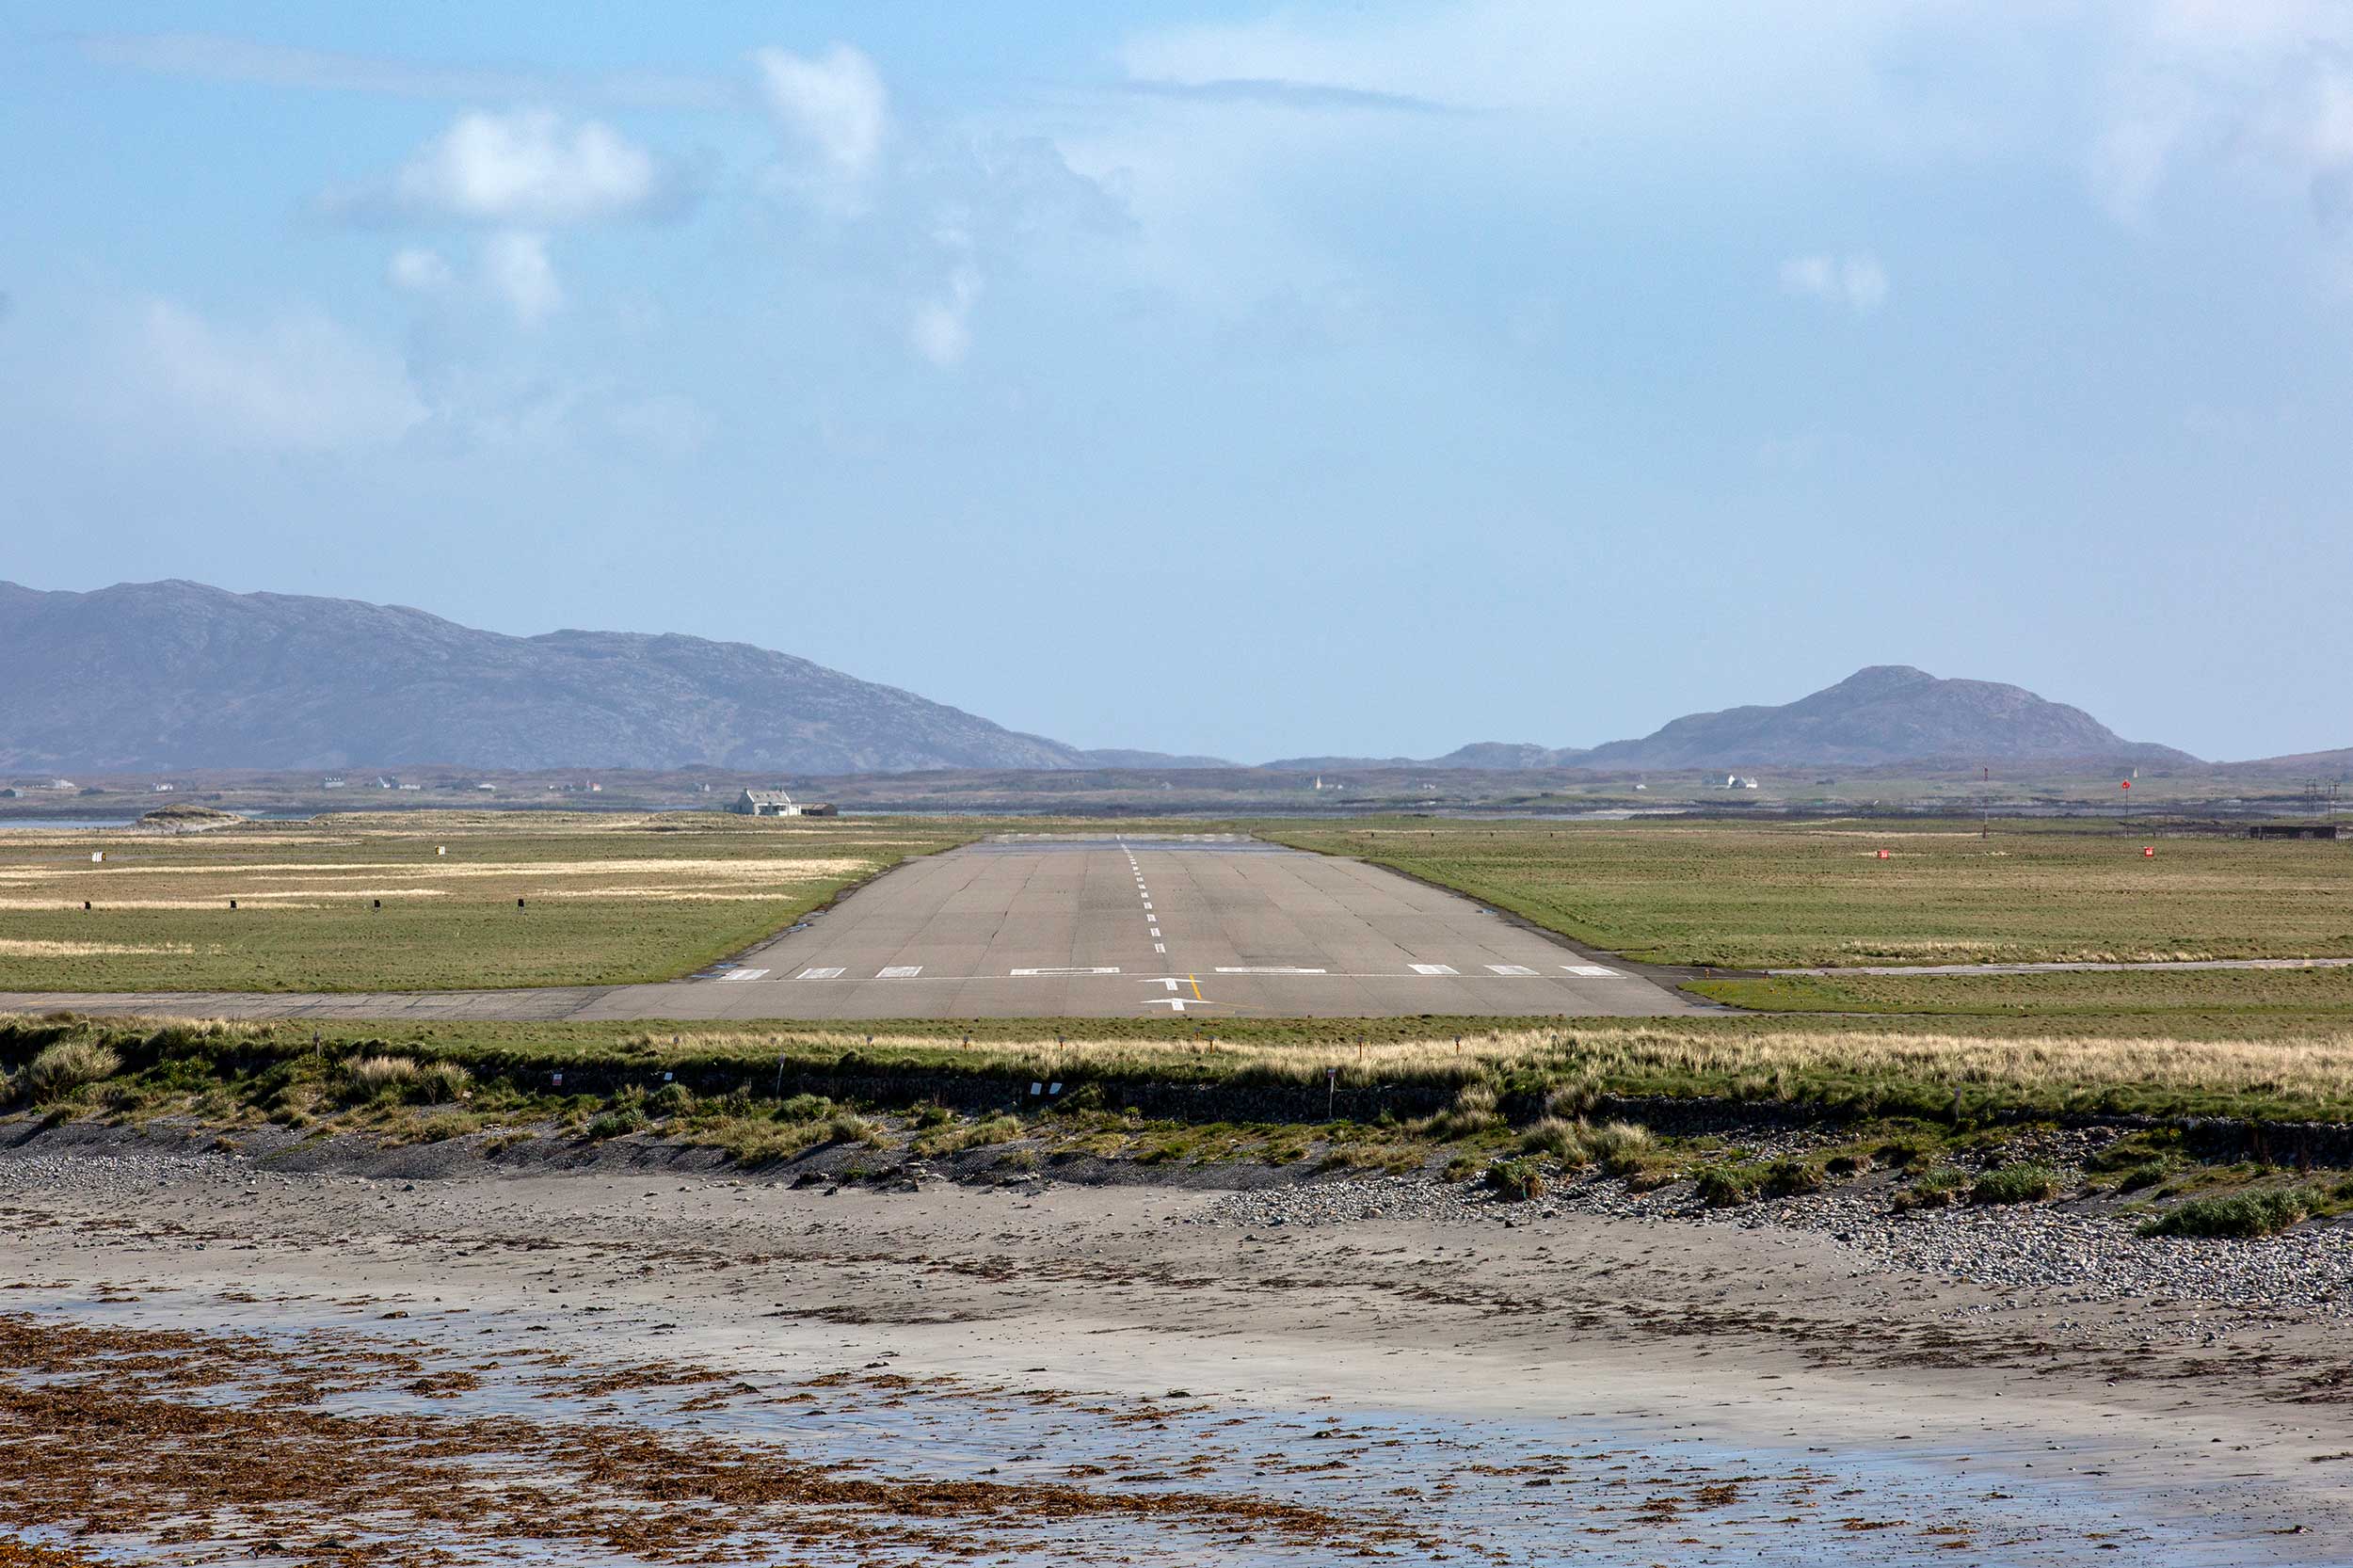 Benbecula Airport is another affected